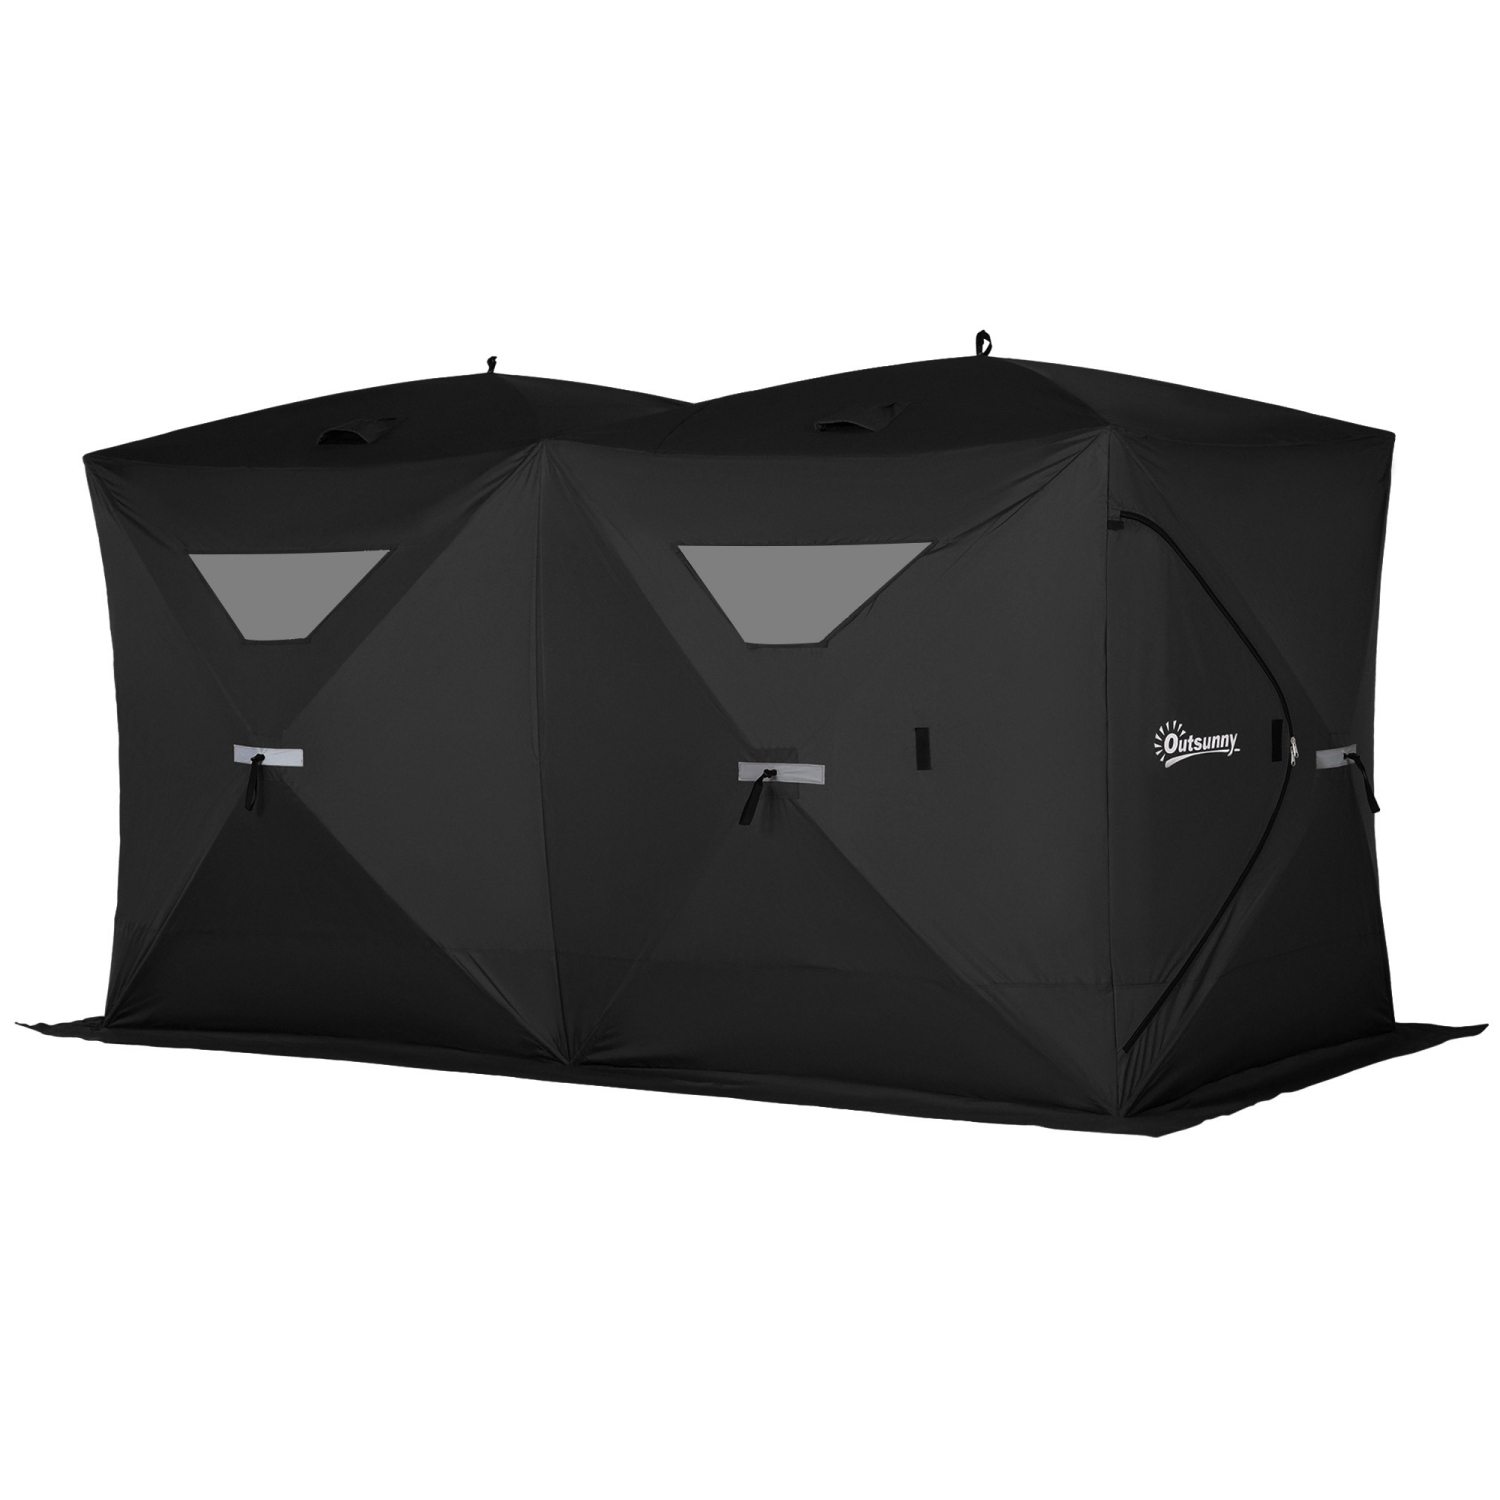 Outsunny 5-8 Person Ice Fishing Shelter, Waterproof Oxford Fabric Portable Pop-up Ice Tent with 4 Doors for Outdoor Fishing, Black